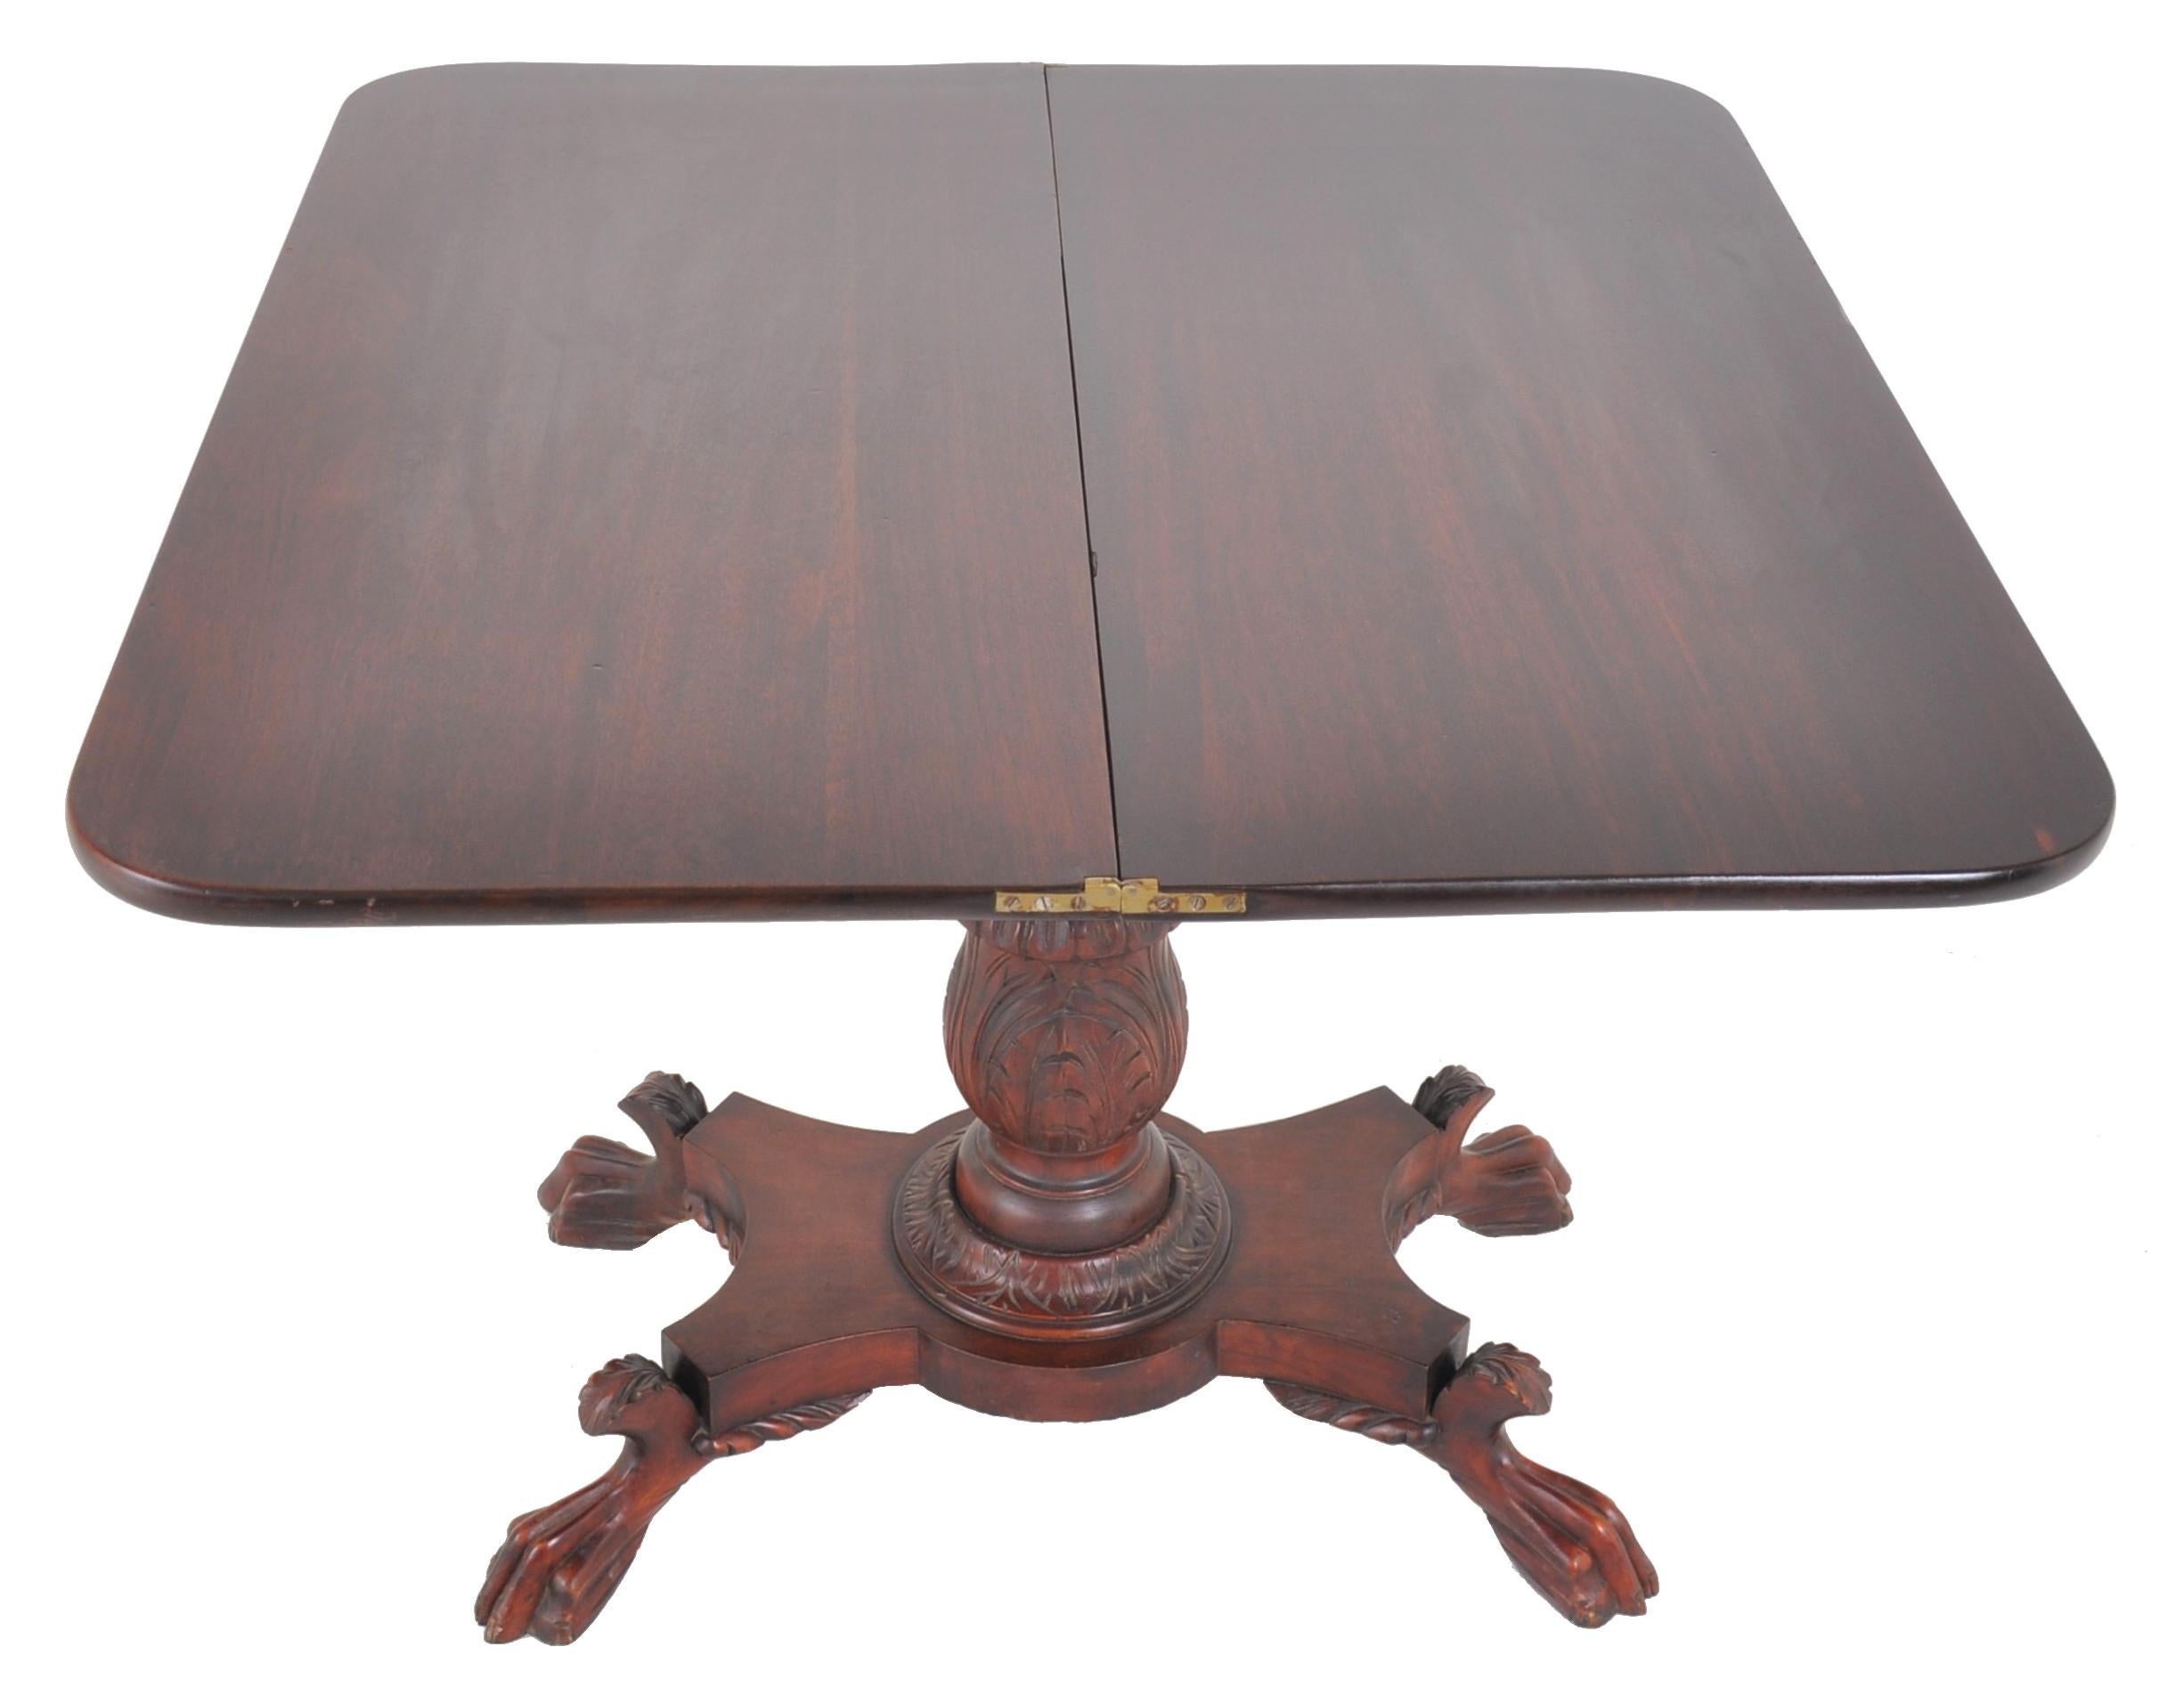 19th Century Antique American Late Federal/Empire Mahogany Tea/Games/Card Table, circa 1830 For Sale